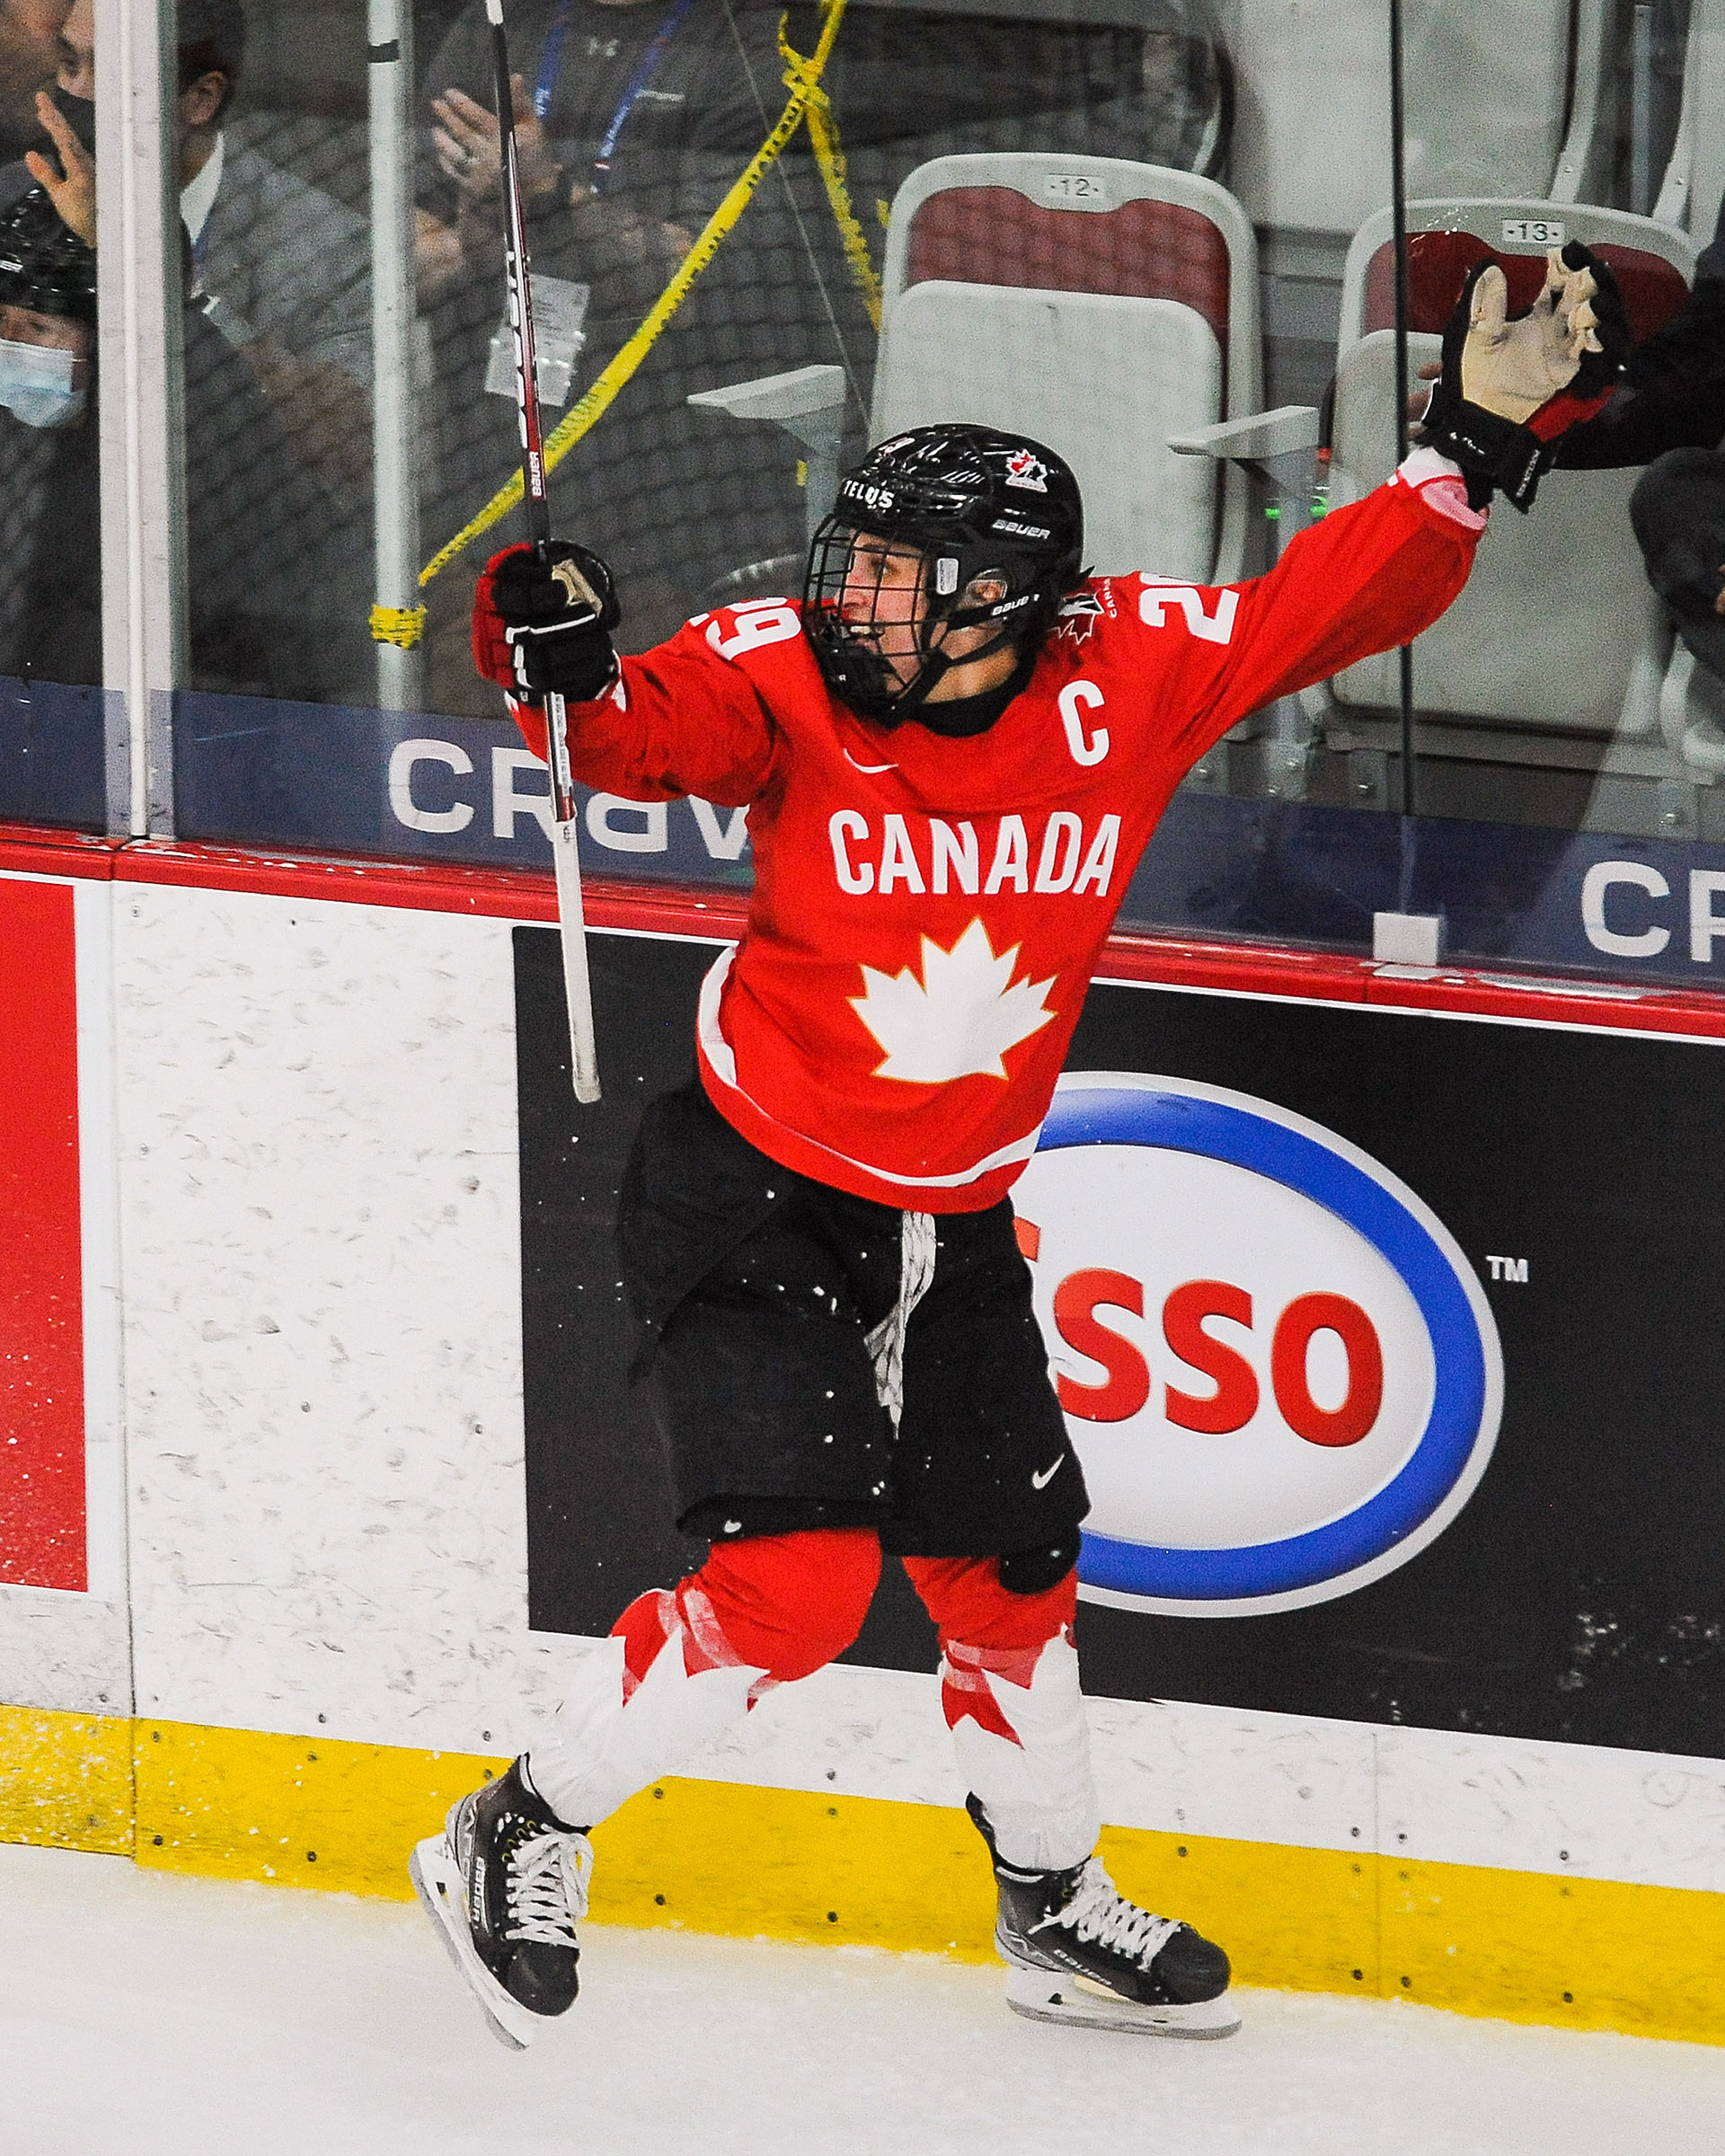 Marie-Philip Poulin #29 of Canada celebrates after scoring the game-winning goal against United States in the 2021 IIHF Women&#x27;s World Championship gold medal game played at WinSport Arena on August 31, 2021 in Calgary, Canada. Canada defeated United States 3-2 in overtime.